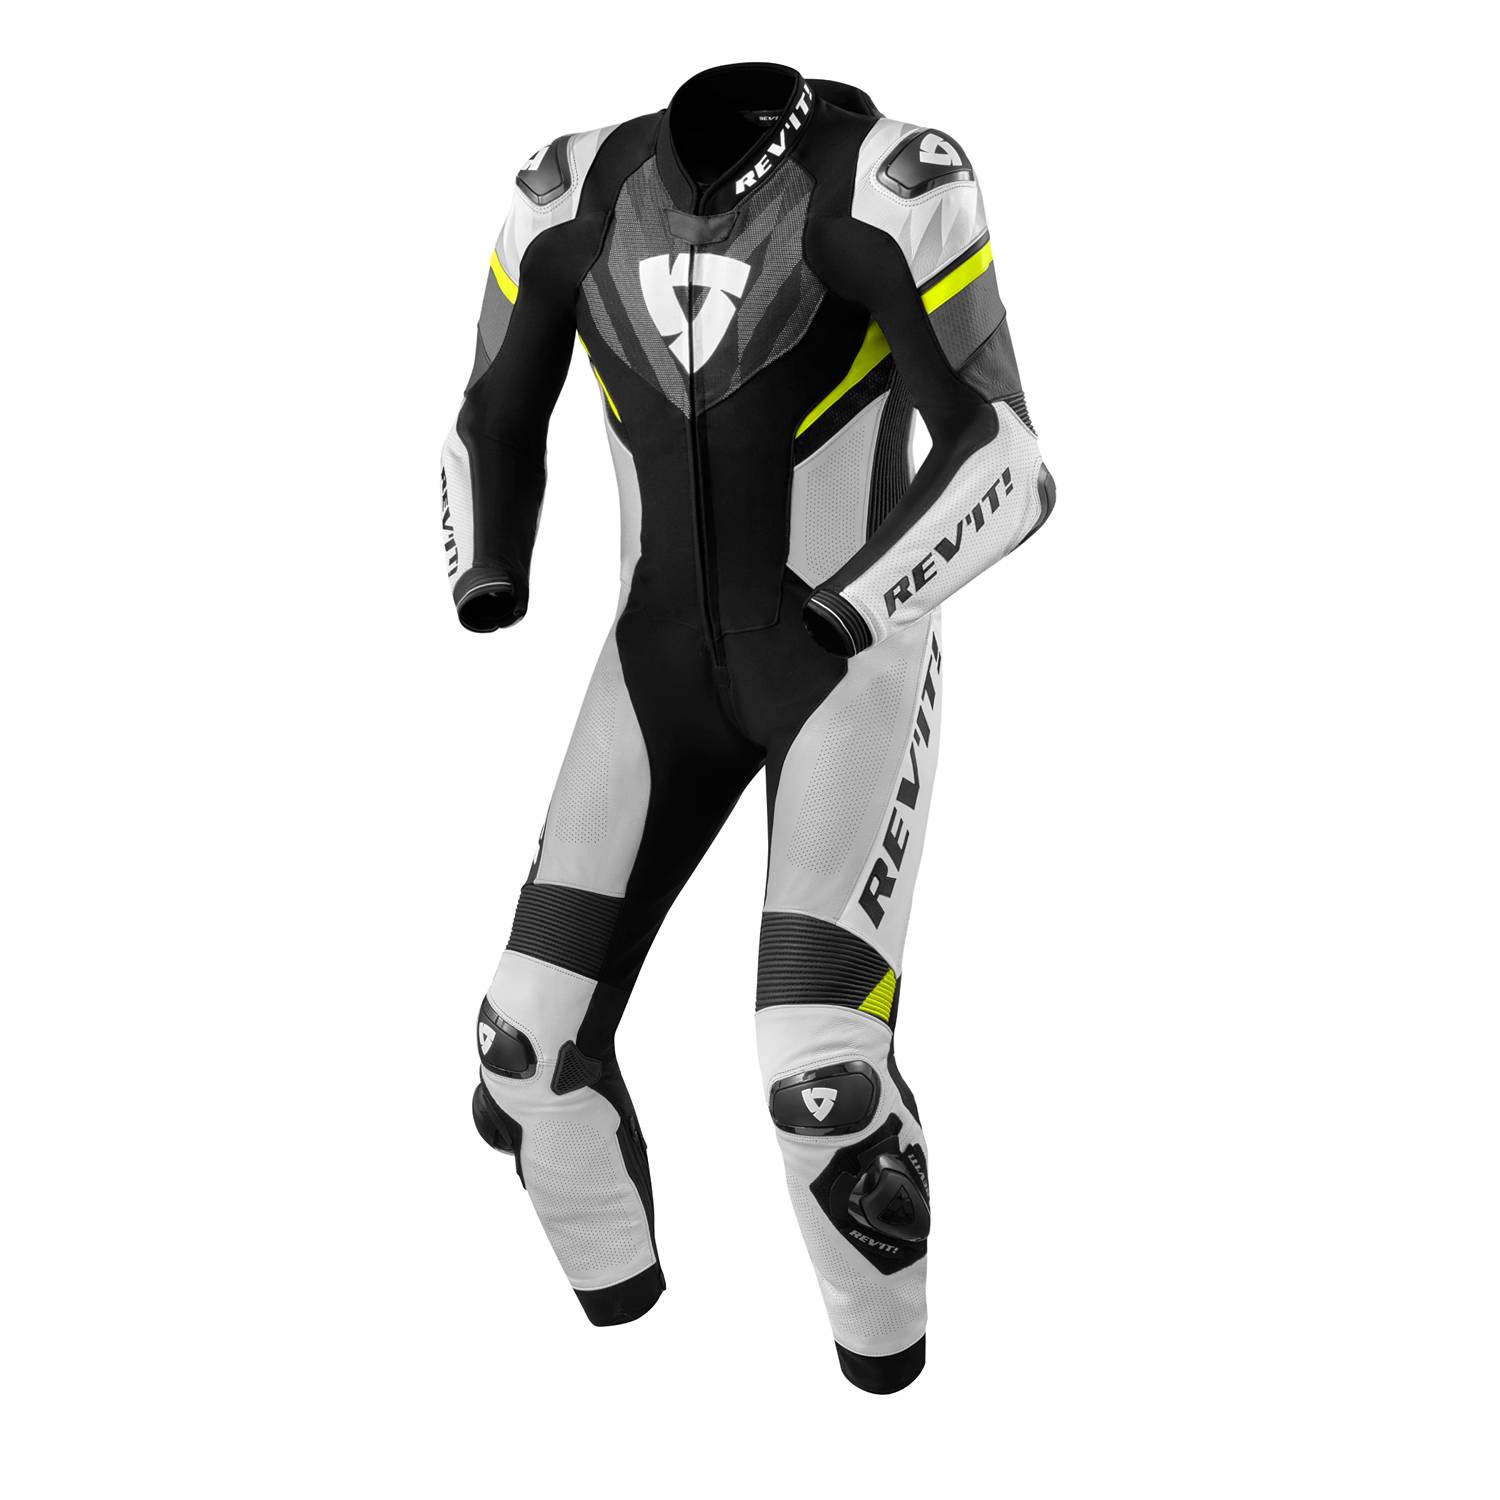 Image of REV'IT! Hyperspeed 2 One Piece Suit Black Grey Size 48 ID 8700001359665